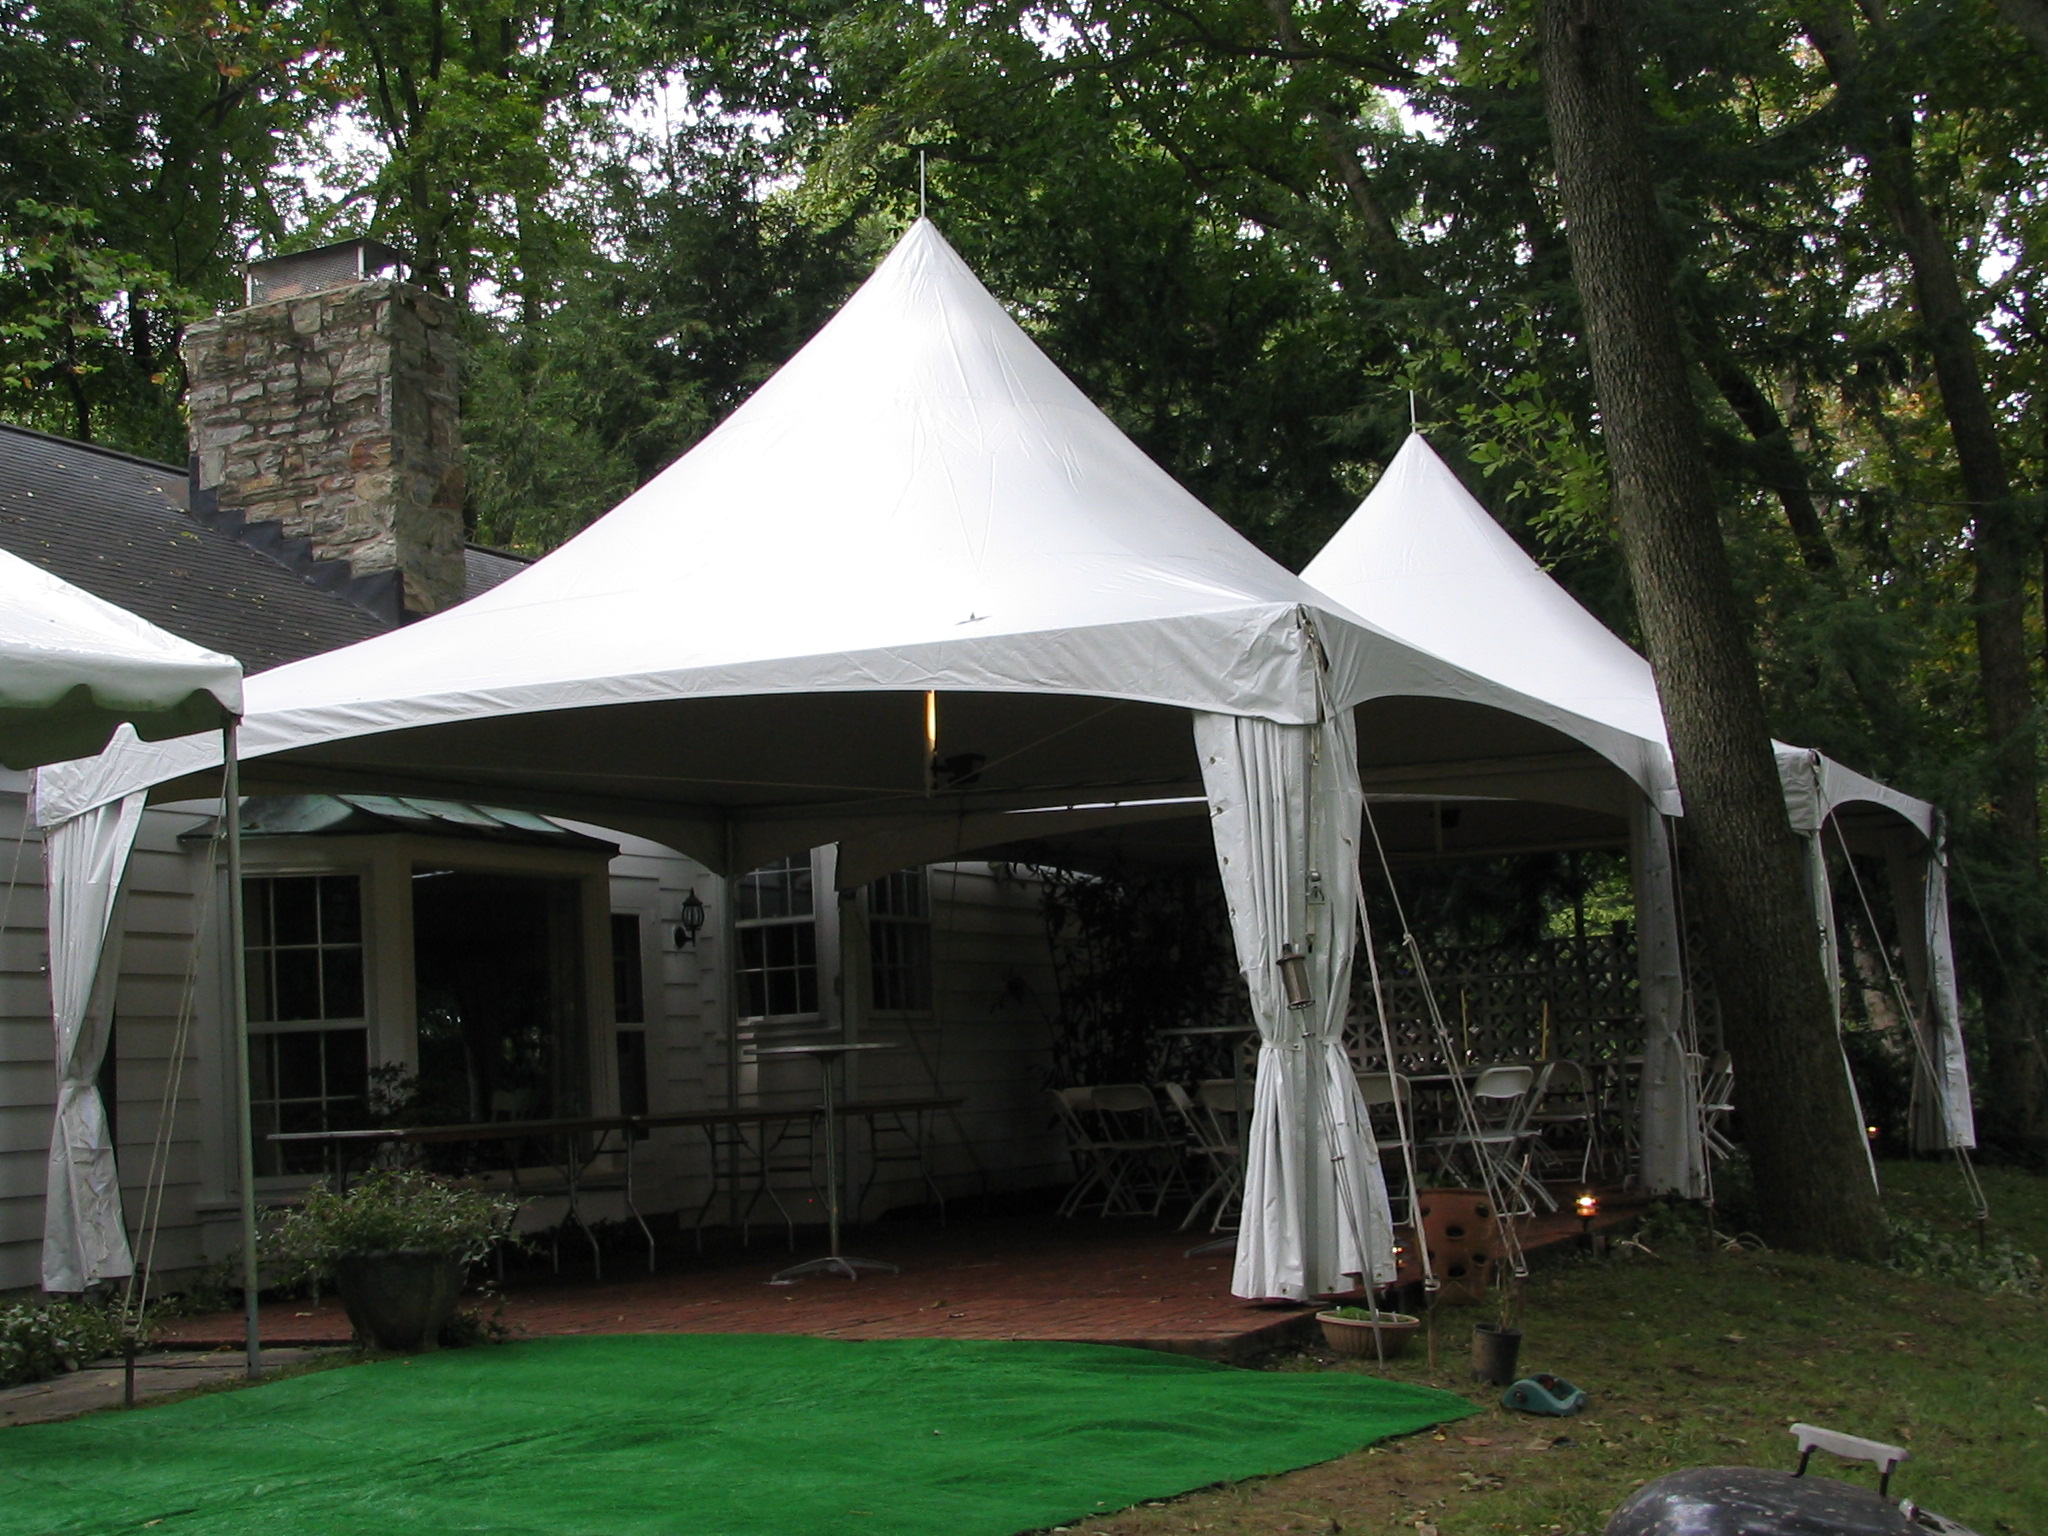 Party rentals in Allentown, PA